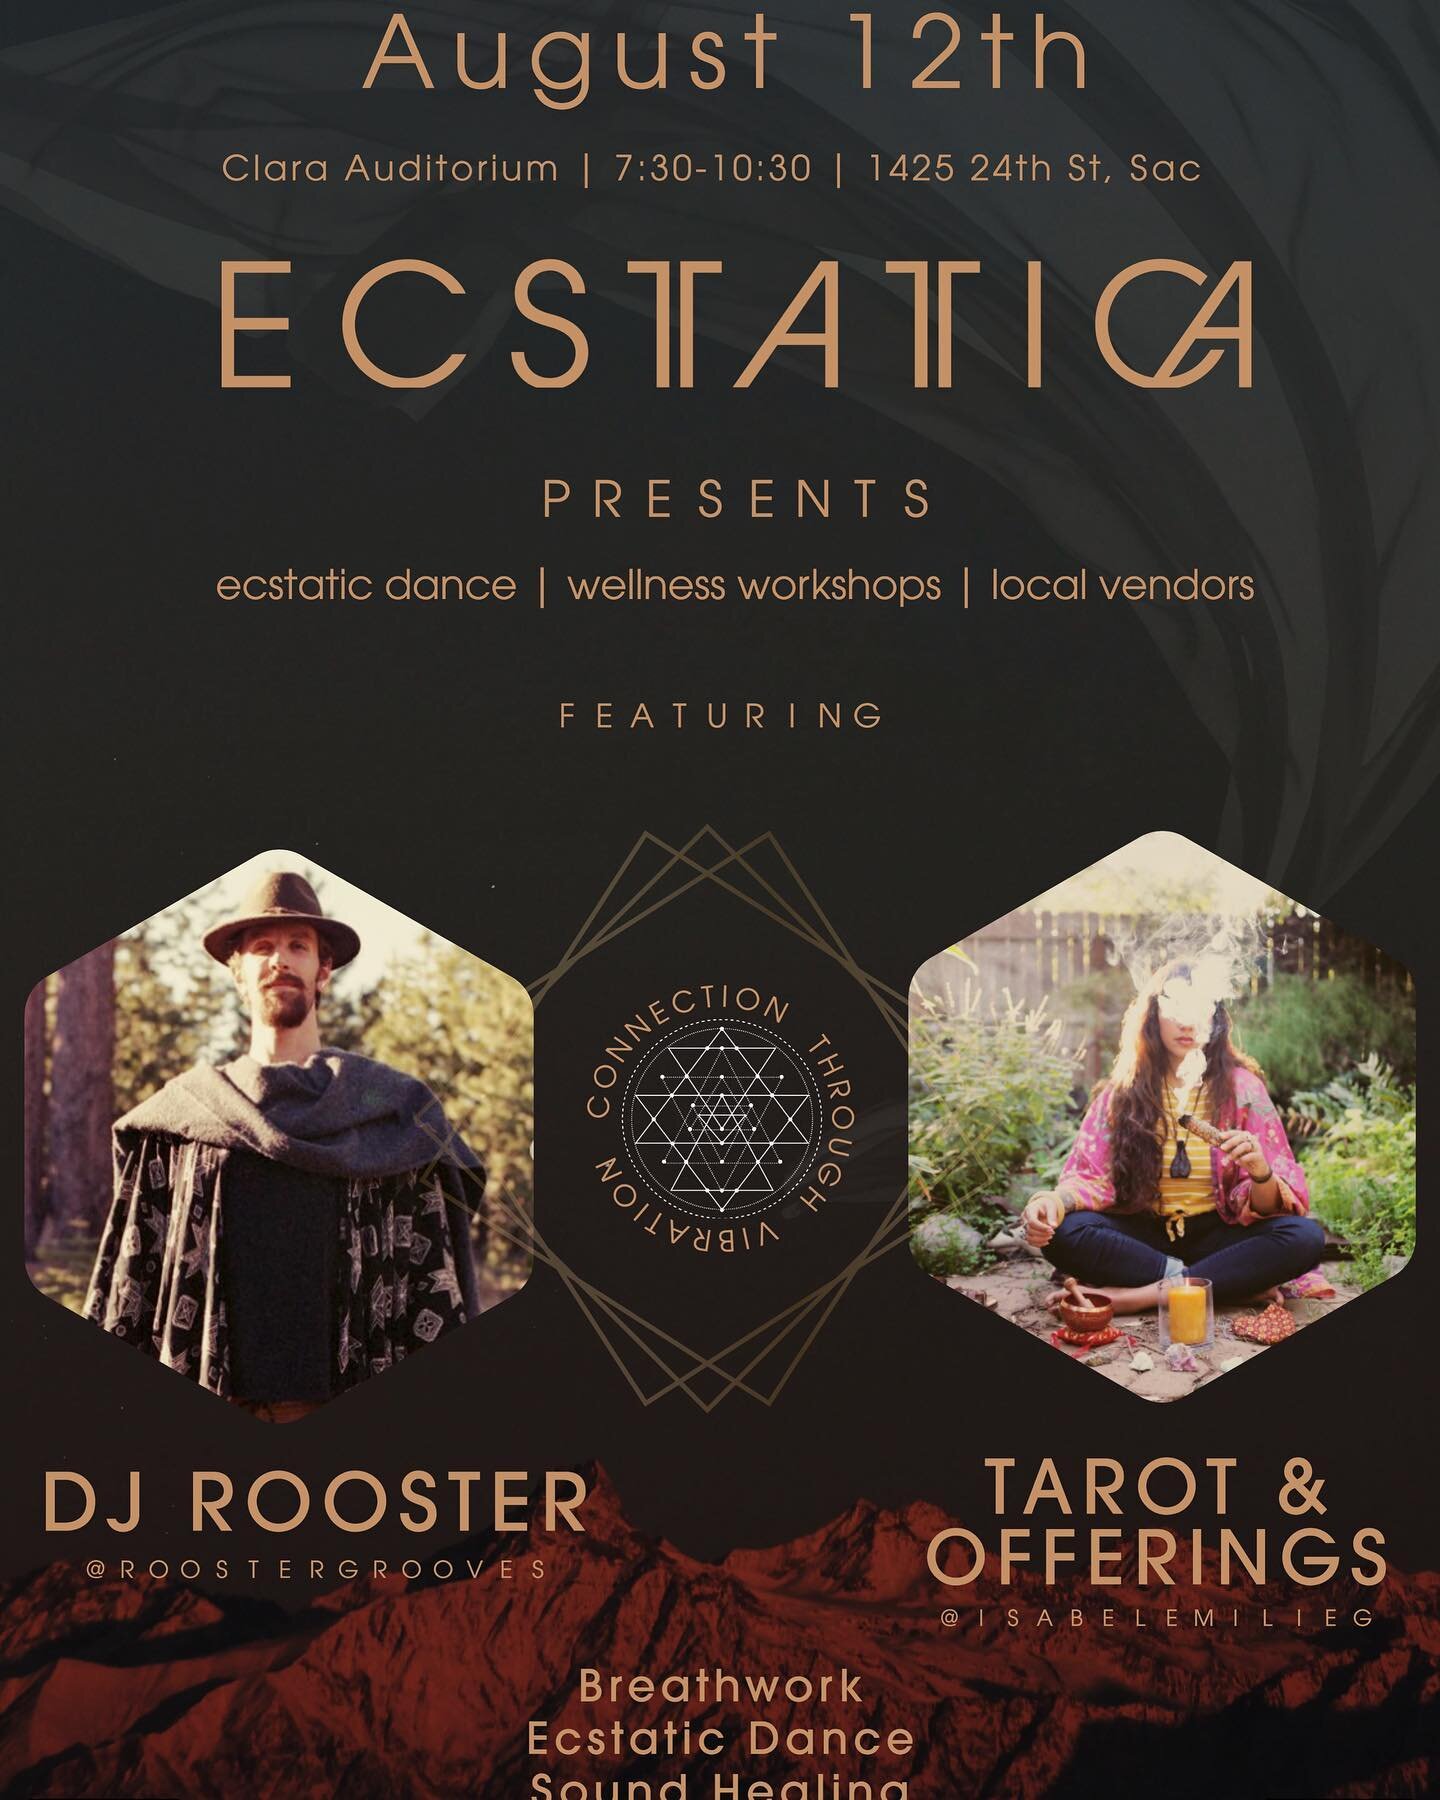 This and so much more ✨

Join us on Friday 8/12 for a very special, curated experience by @megangrace_90 @mend_n_grow @masonhunters @roostergrooves 

See you there 🙌🏾

#ecstatica #ecstaticdance #thingstodoinsacramento #radicalwellness #tarotreaders